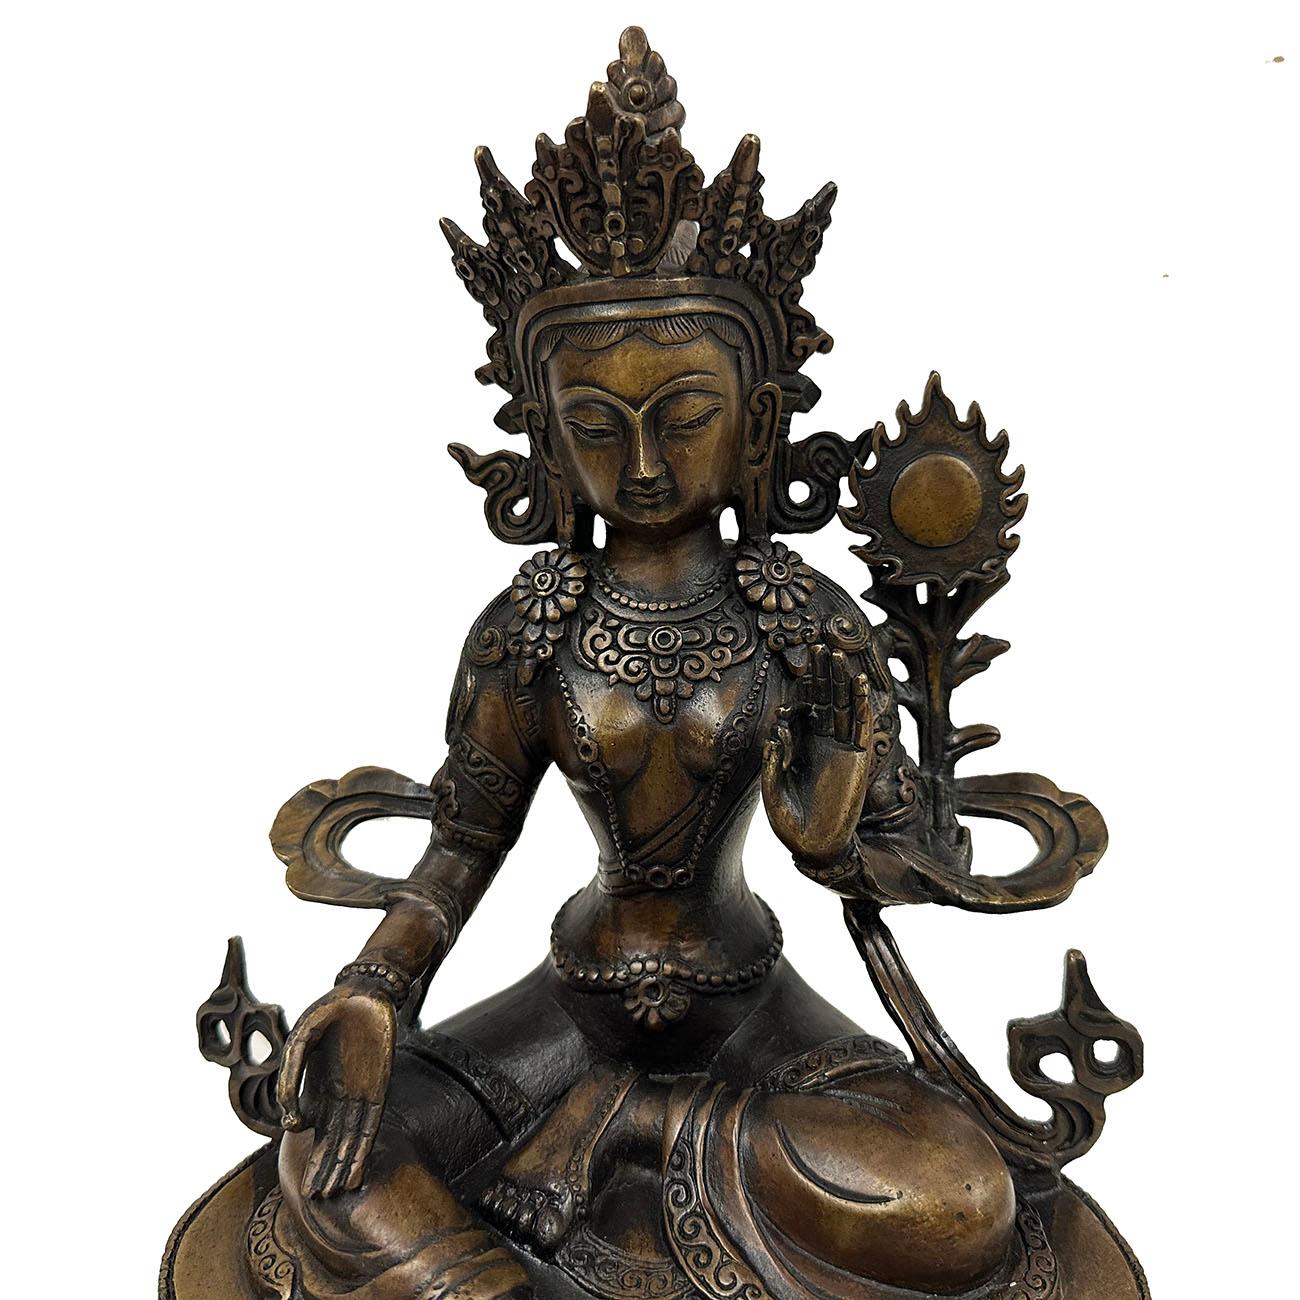 Featured a beautiful bronze sculpture of Tibetan Tara. This Tara is decorated with flowers, lariats, ankle bracelets. She wears an elaborate crown and is seated on a lotus throne. Uprising hands symbolize ability to remove evil and bring blessings.